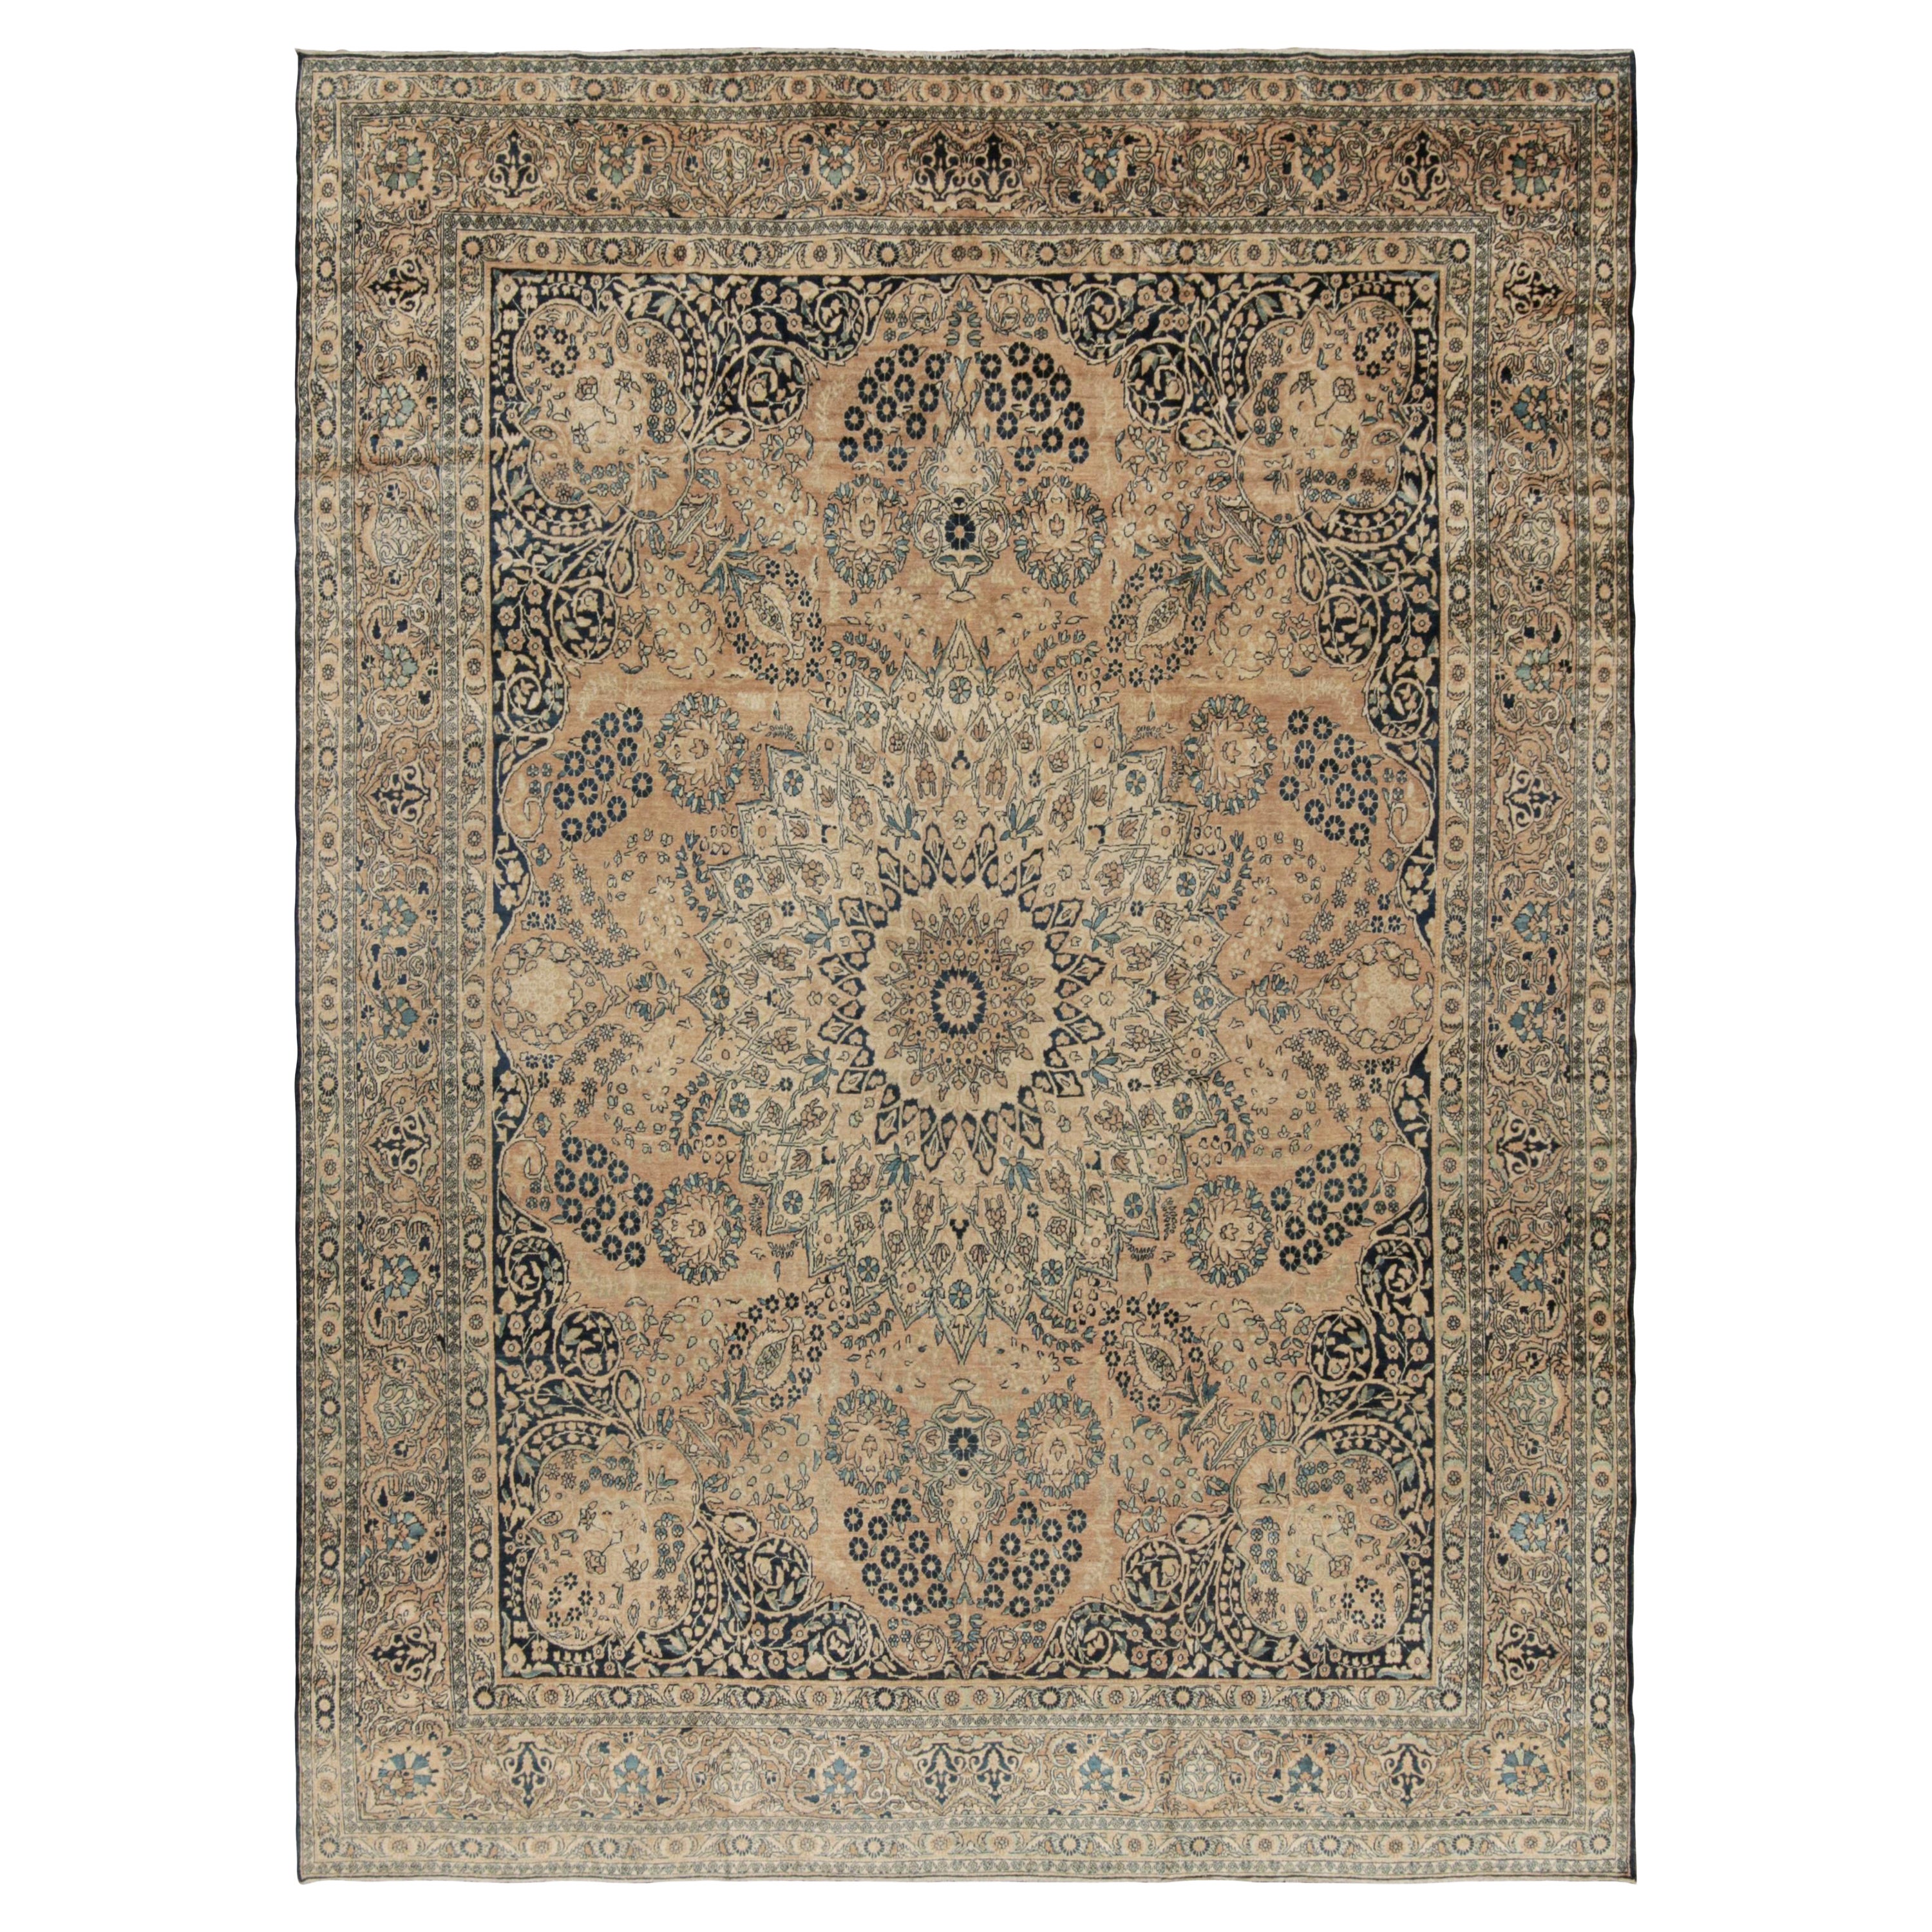 Antique Persian Yazd Rug in Gold-Blue Floral Patterns by Rug & Kilim  For Sale